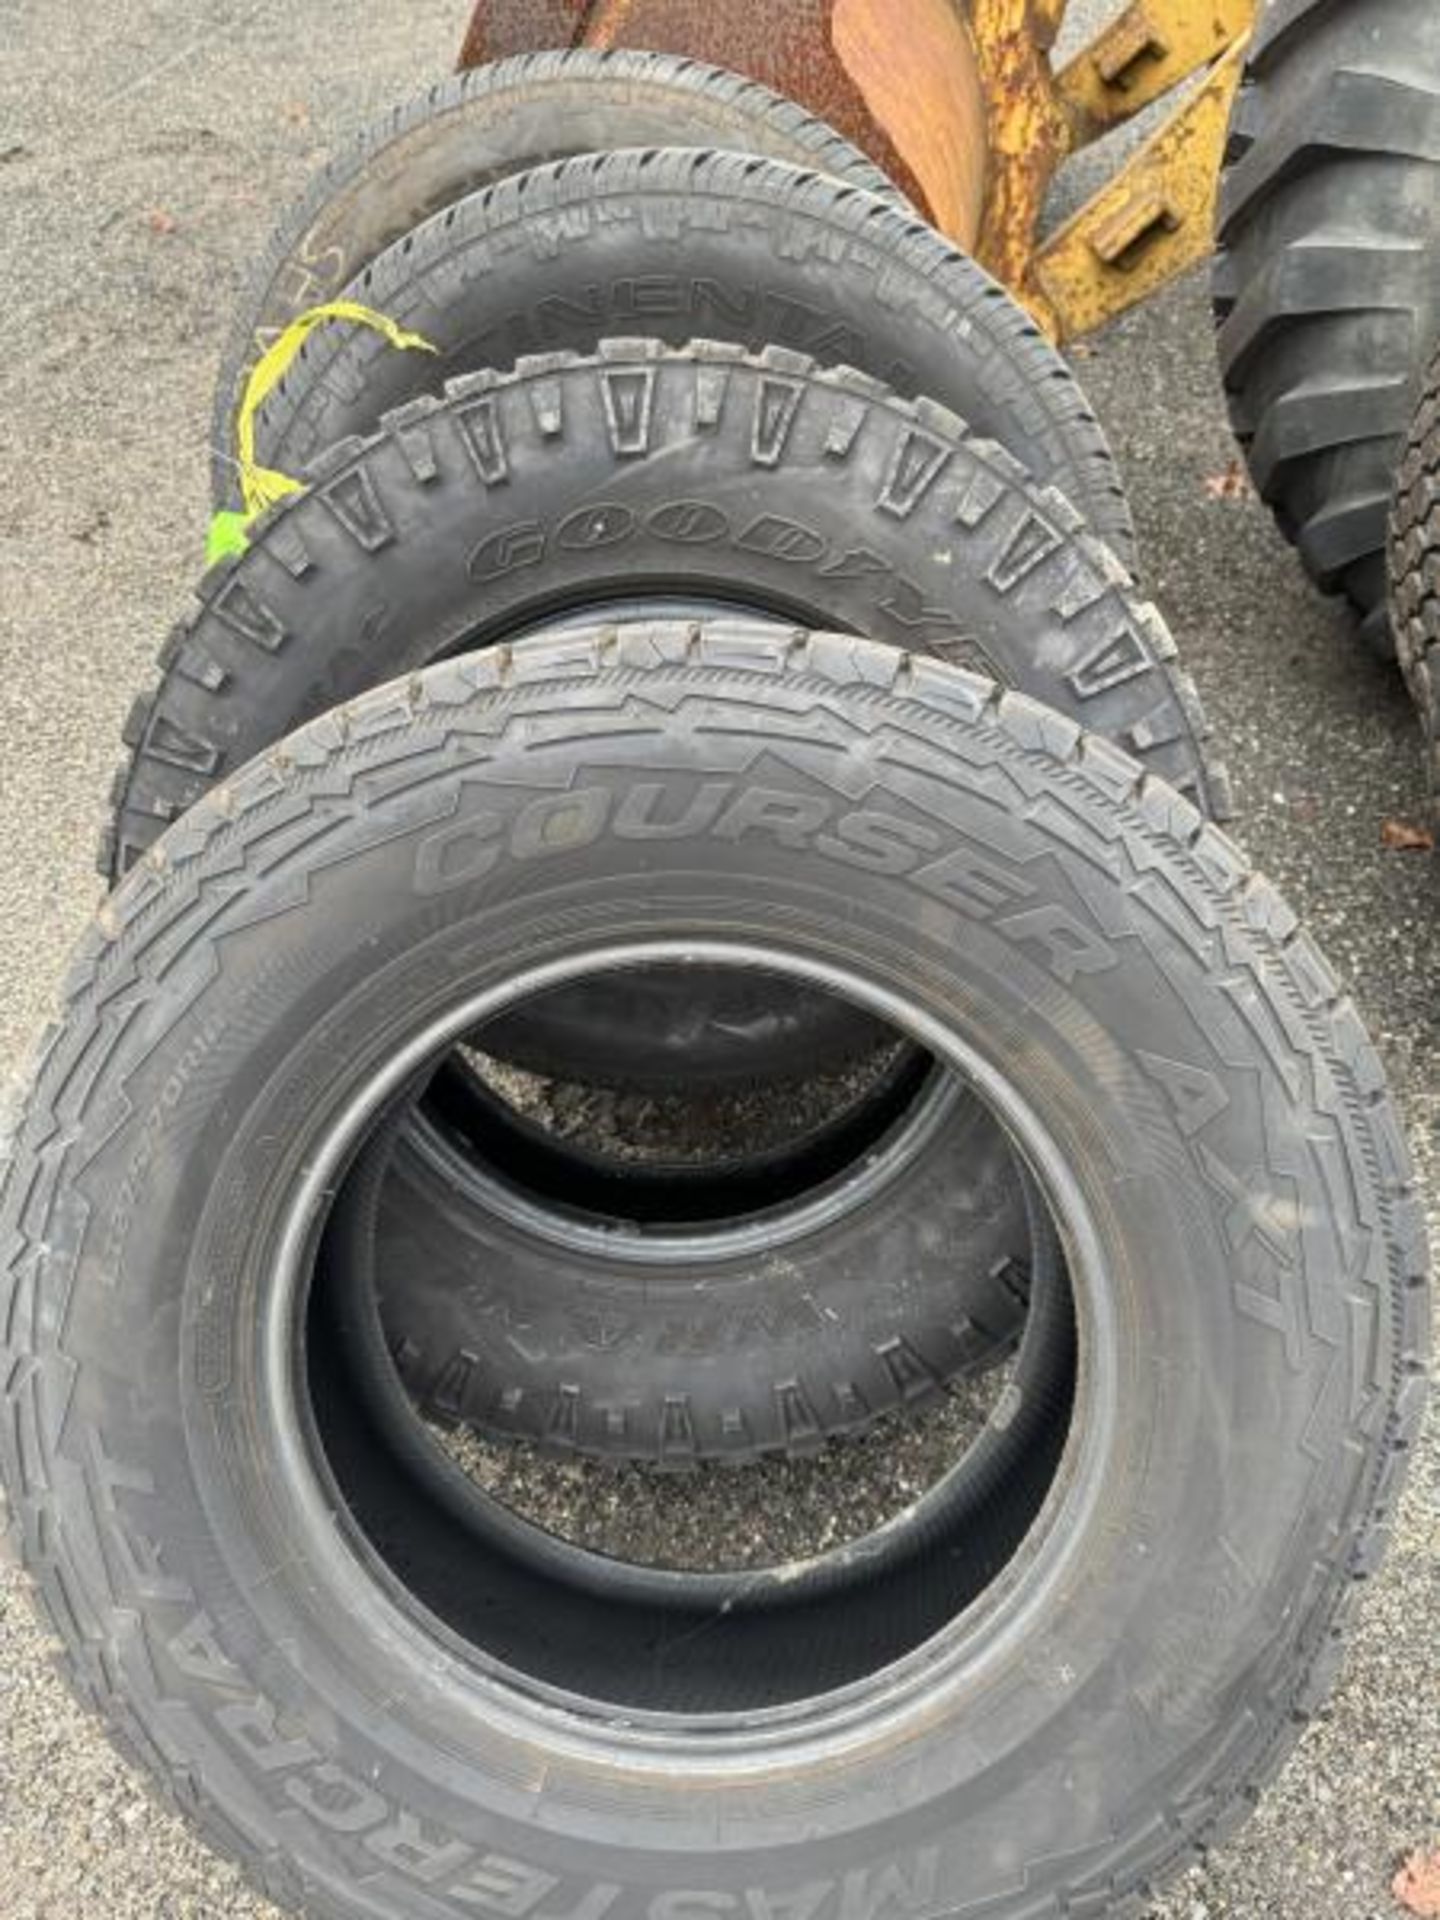 Lot of (4) Tires Including: (1) Courser AXT Master Craft, (1) Goodyear Wrangler Duratrac, (2) Contit - Image 3 of 3